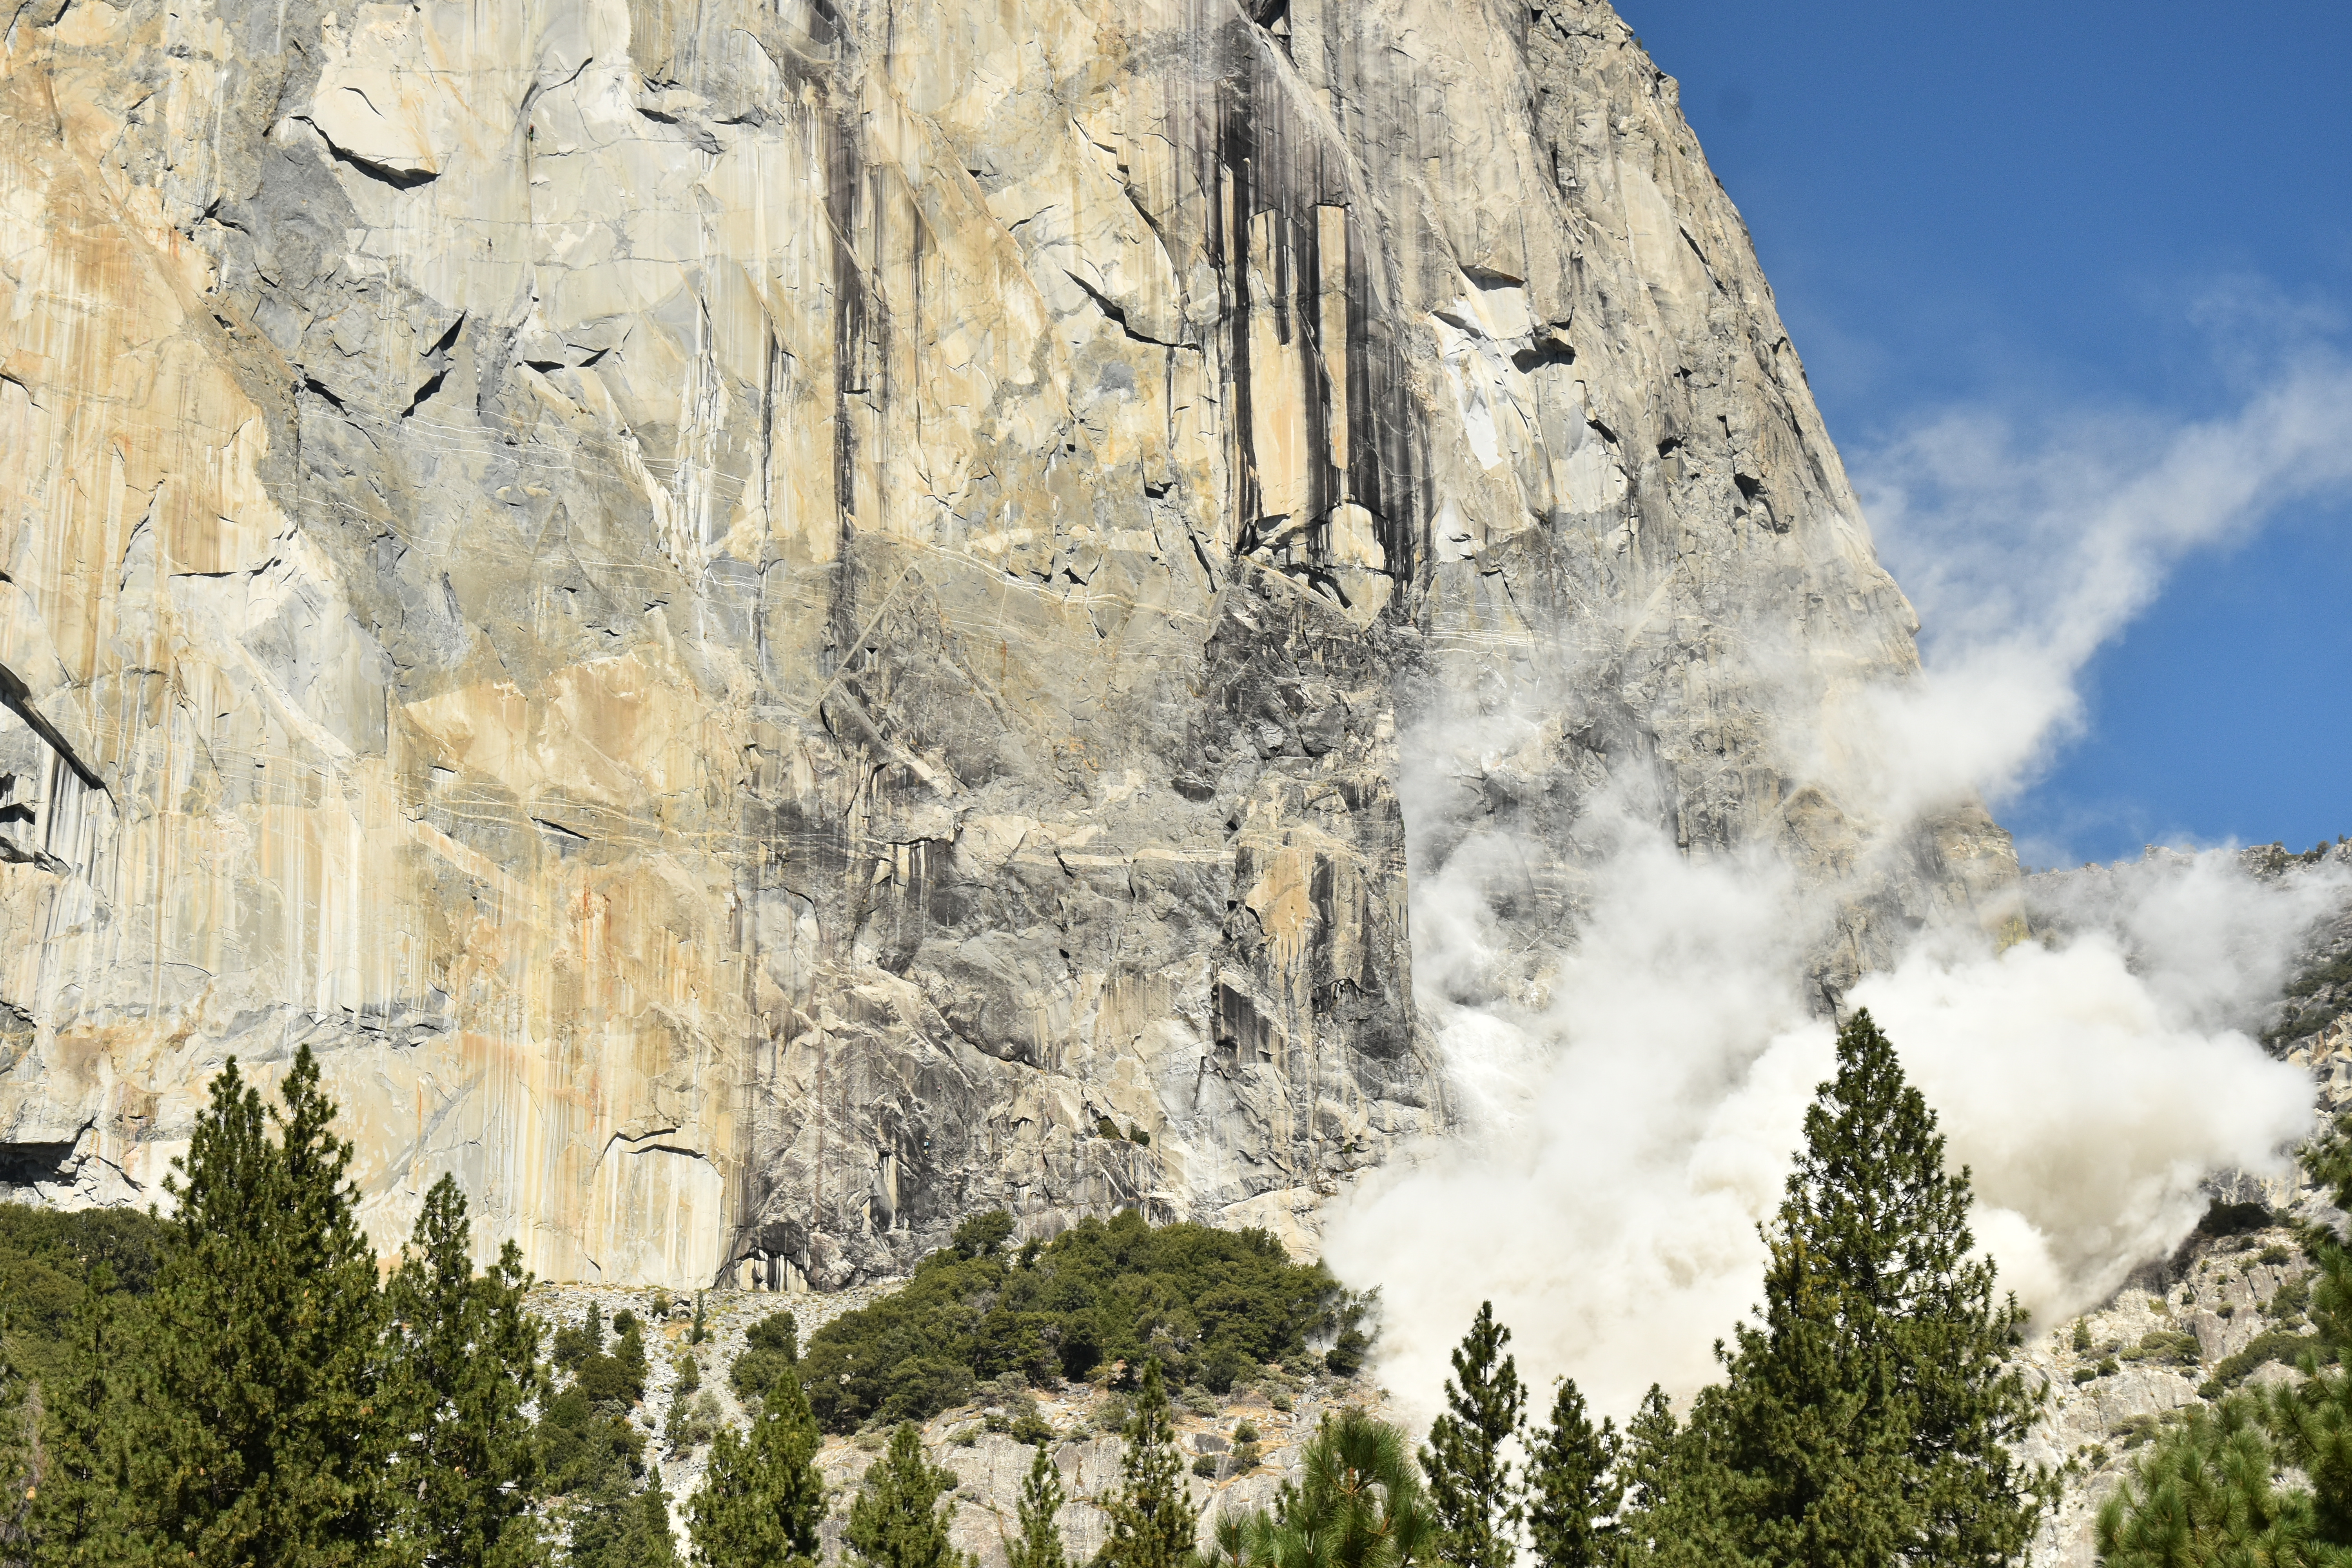 A huge plume of granite dust billows at the base of Yosemite's El Capitan where a massive series of rockfalls occurred the afternoon of September 27. A fresh, white rock scar where the event originated can be seen to the right of the black streaks. One person was killed and another injured. A second rockfall event happened approximately 24 hours after this photo was taken, and was significantly larger. The rockfalls originated on El Capitan's Waterfall Route, which three climbers were ascending at the time, and they were just high enough to be out of harm's way. The National Park Service estimated the first event to have a cumulative volume of about 16,000 cubic feet. The second was significantly larger. [Photo] Tom Evans